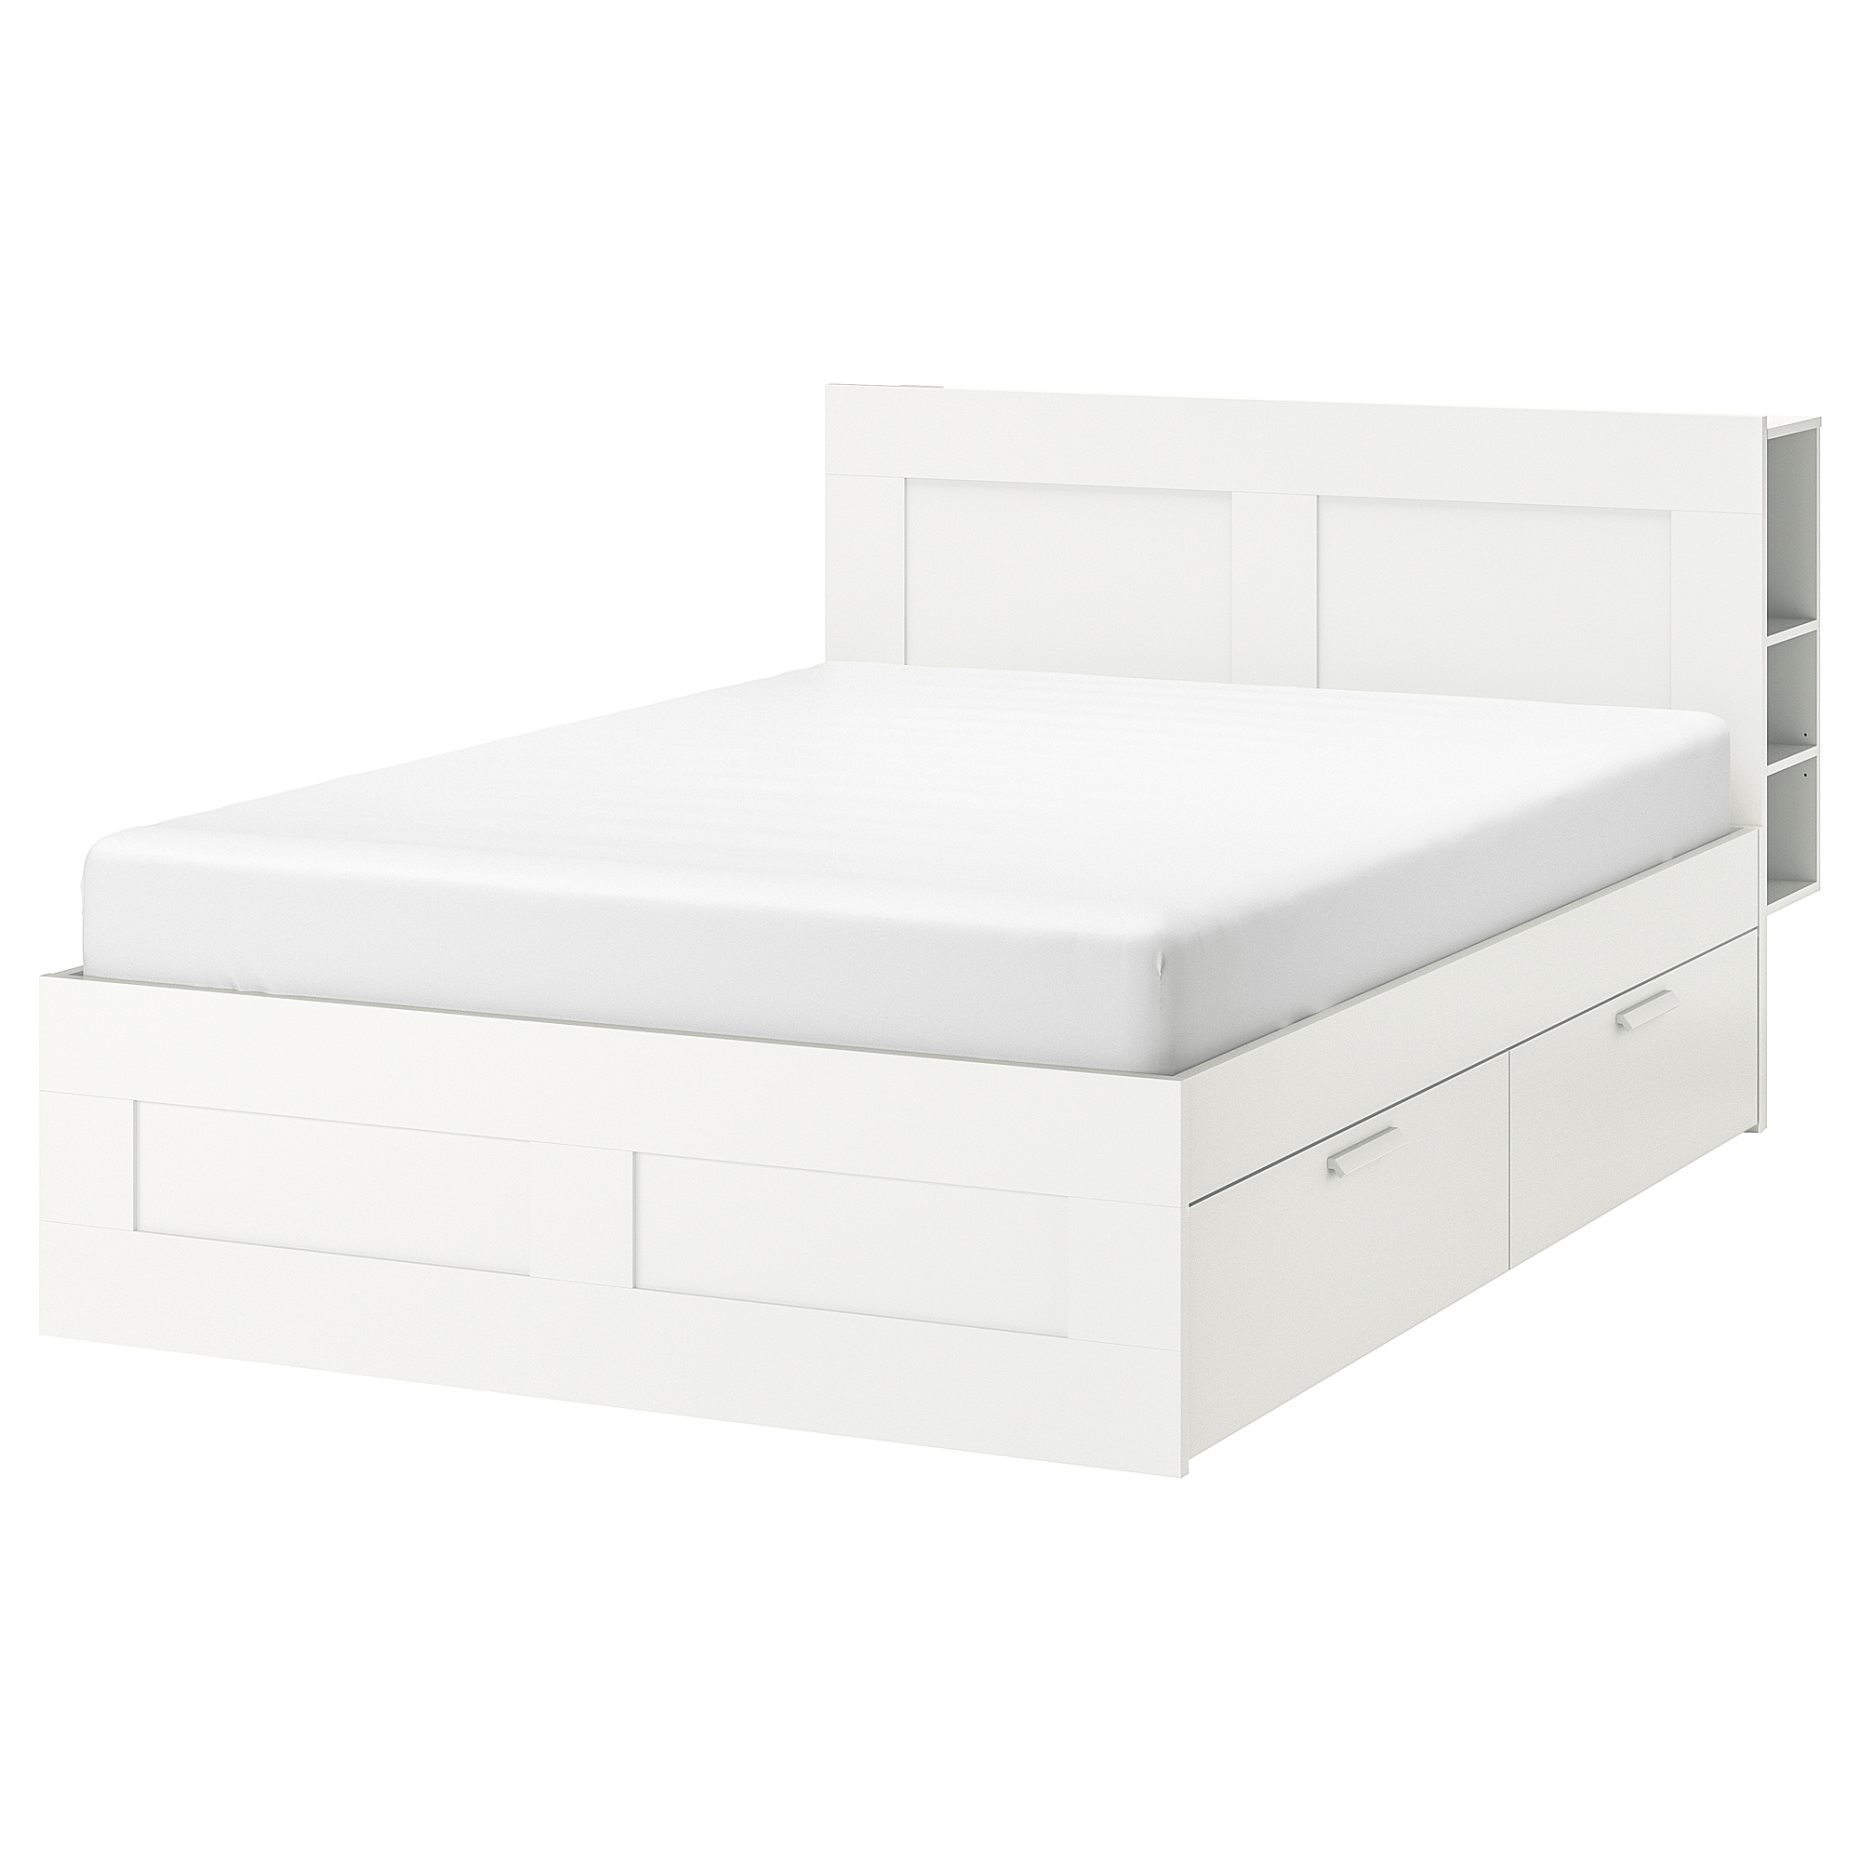 BRIMNES, bed frame with storage and headboard, 160X200 cm, 991.574.74